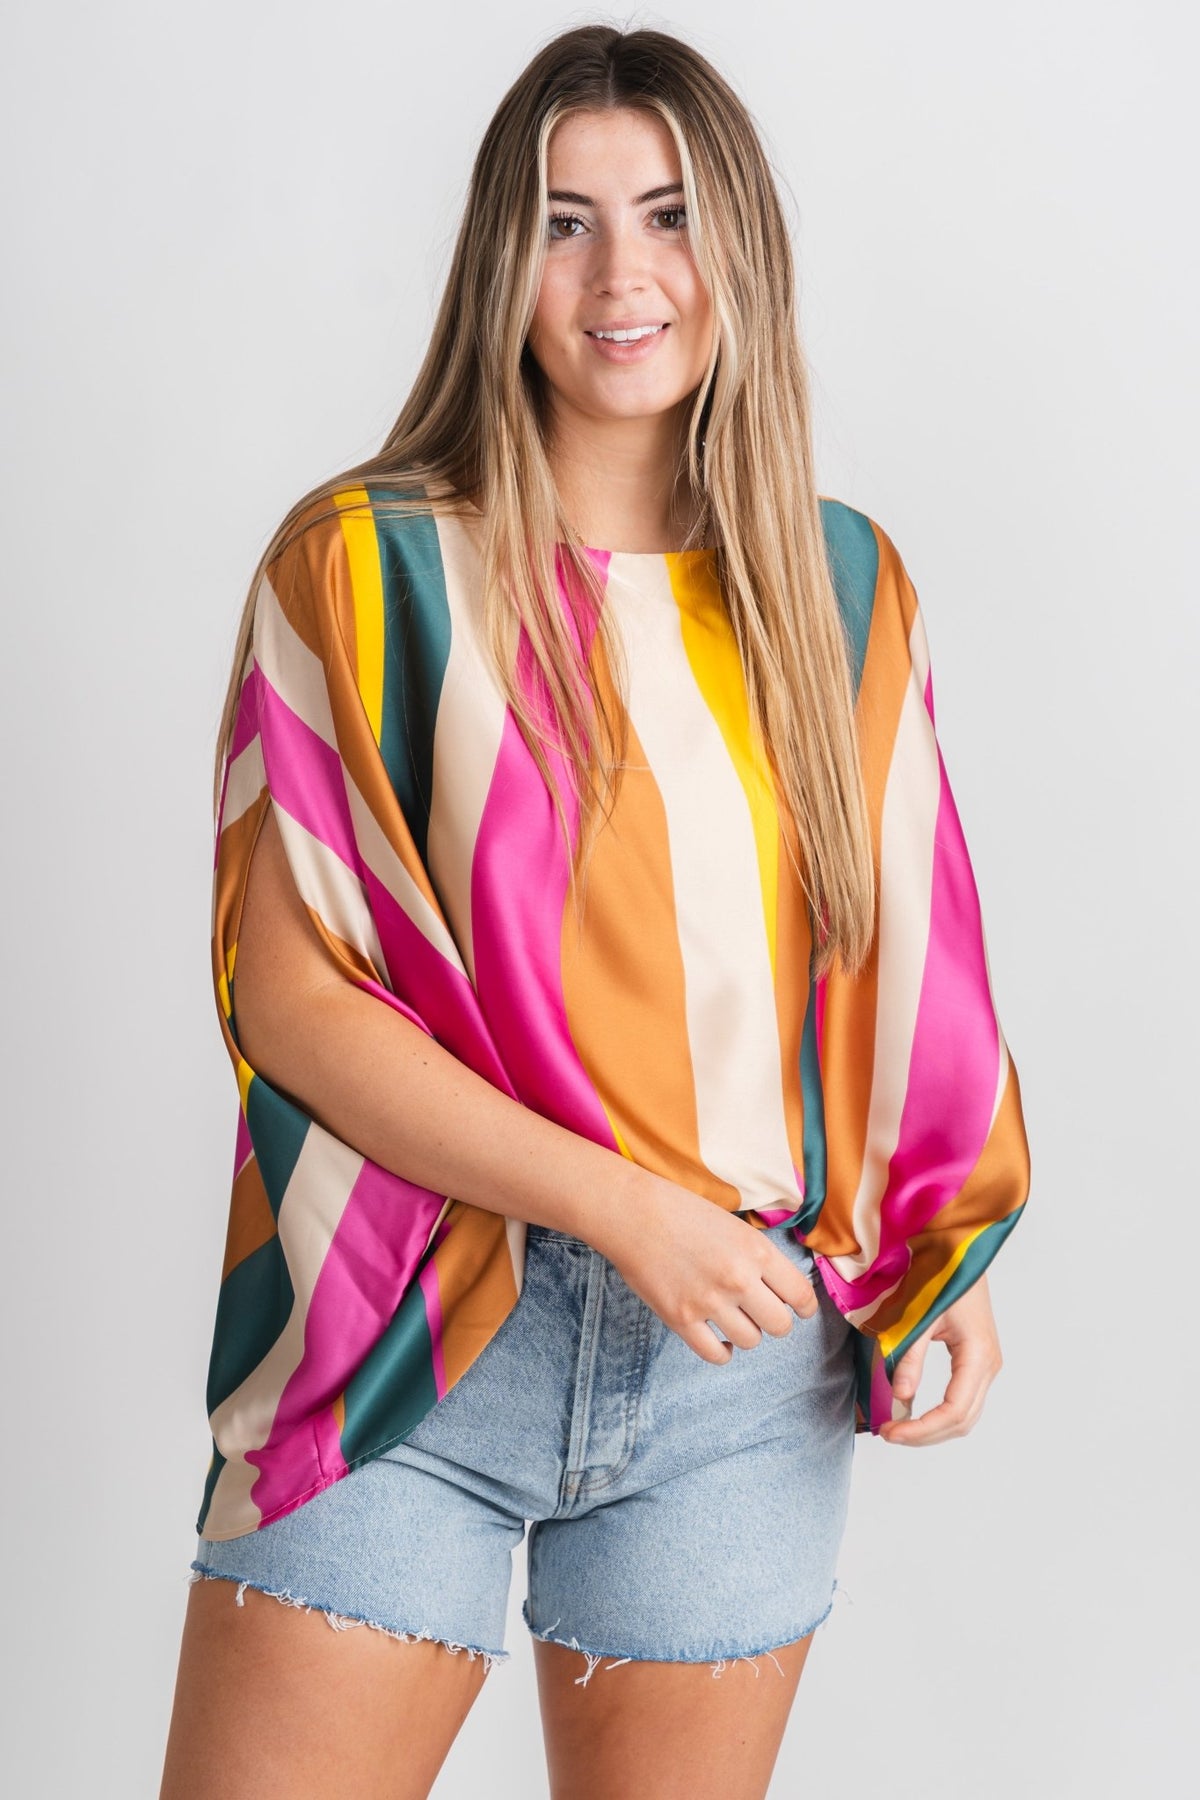 Striped sunset wonders top pink multi - Trendy Top - Cute Vacation Collection at Lush Fashion Lounge Boutique in Oklahoma City